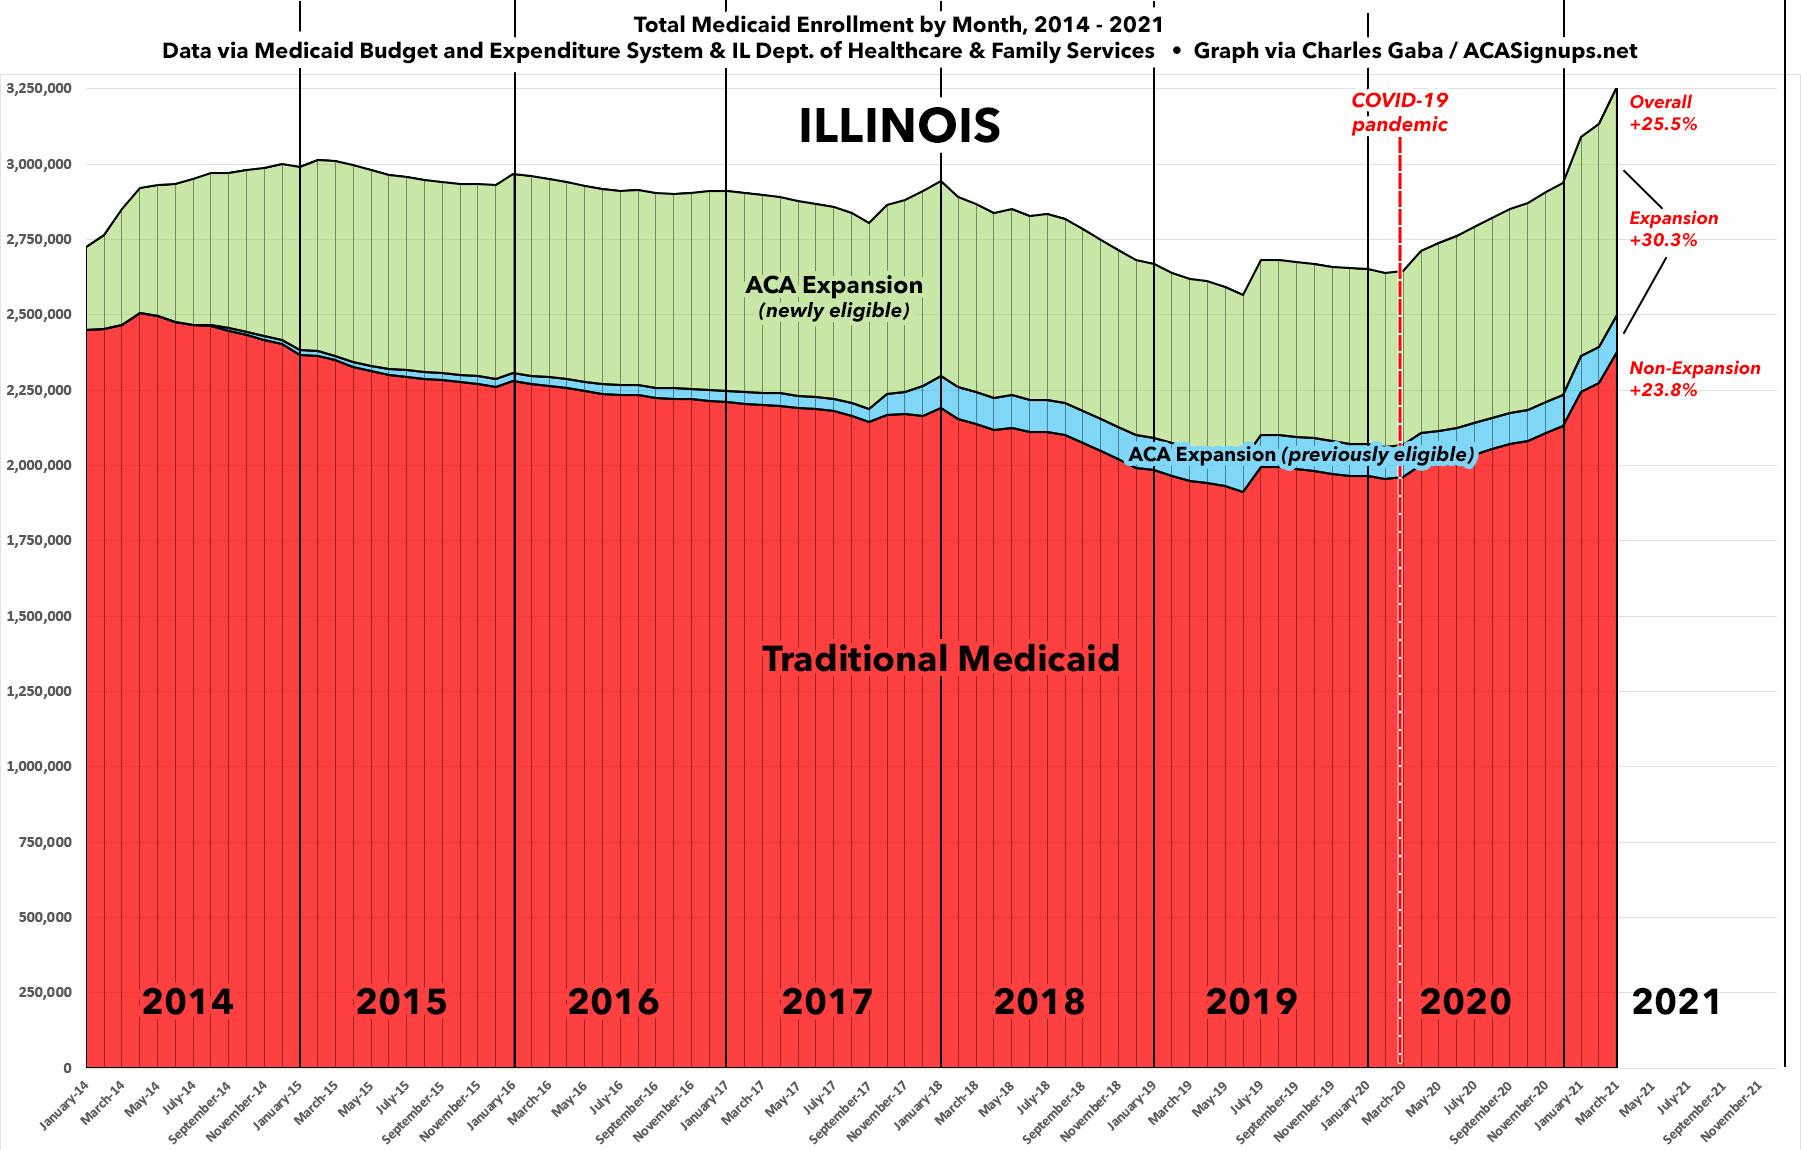 Illinois Medicaid expansion enrollment up 30 since COVID hit; total